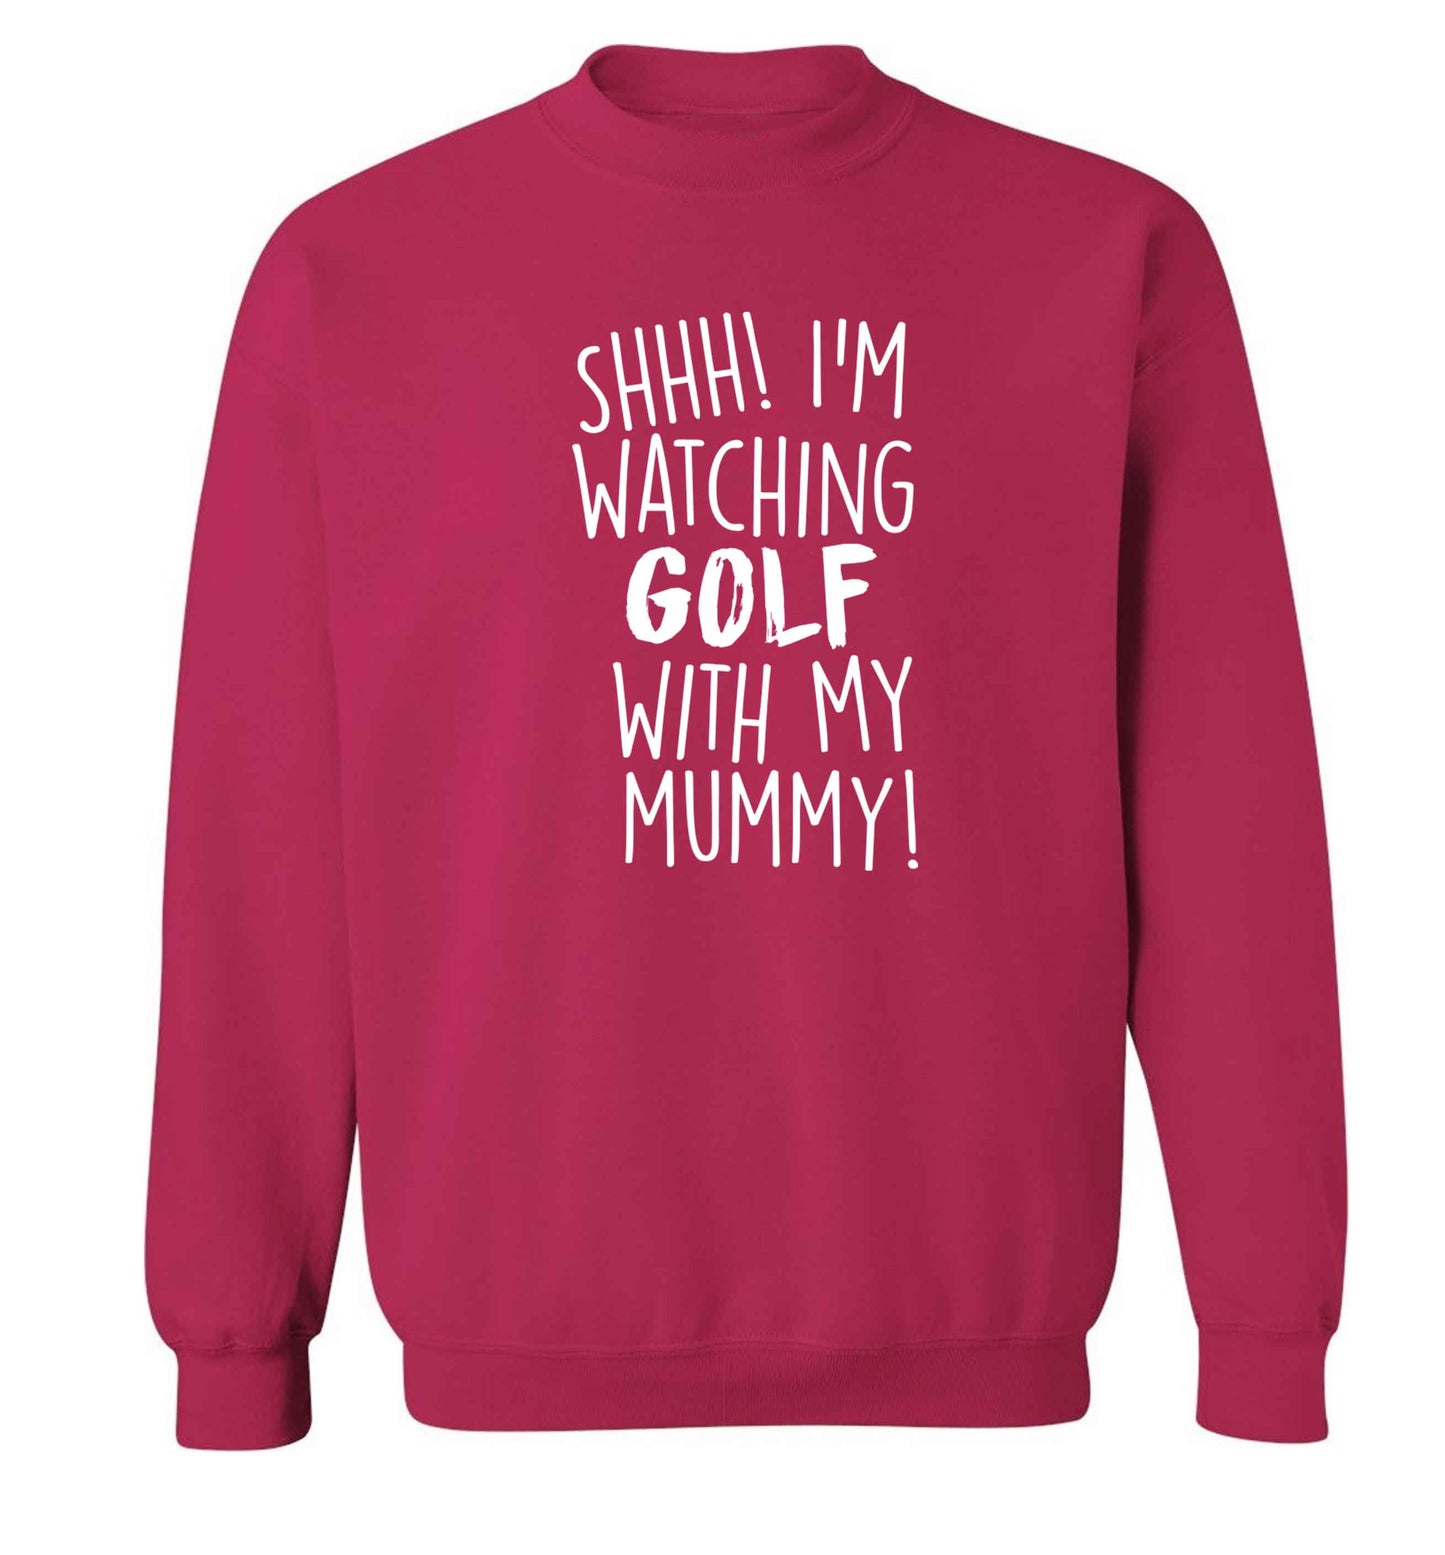 Shh I'm watching golf with my mummy Adult's unisex pink Sweater 2XL